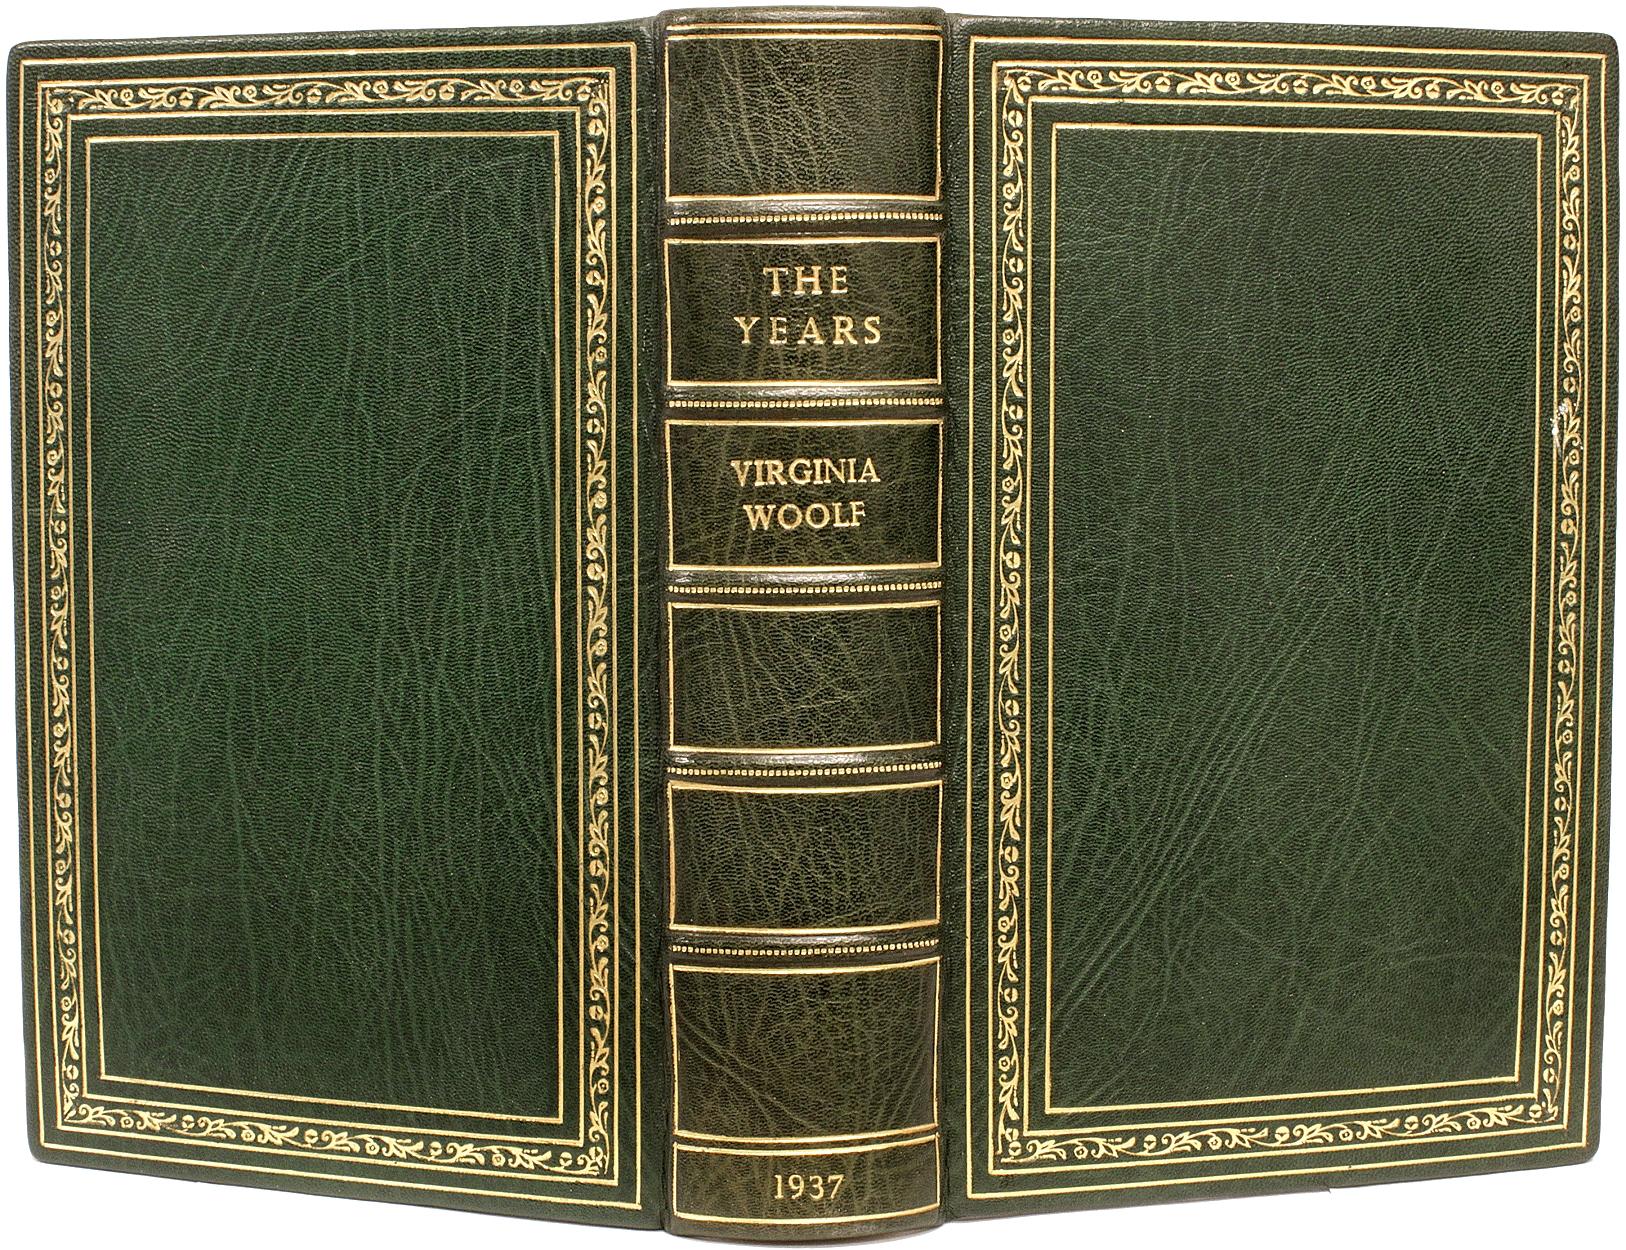 British Virginia Woolf. the Years, First Edition, 1937 in a Fine Full Leather Binding For Sale